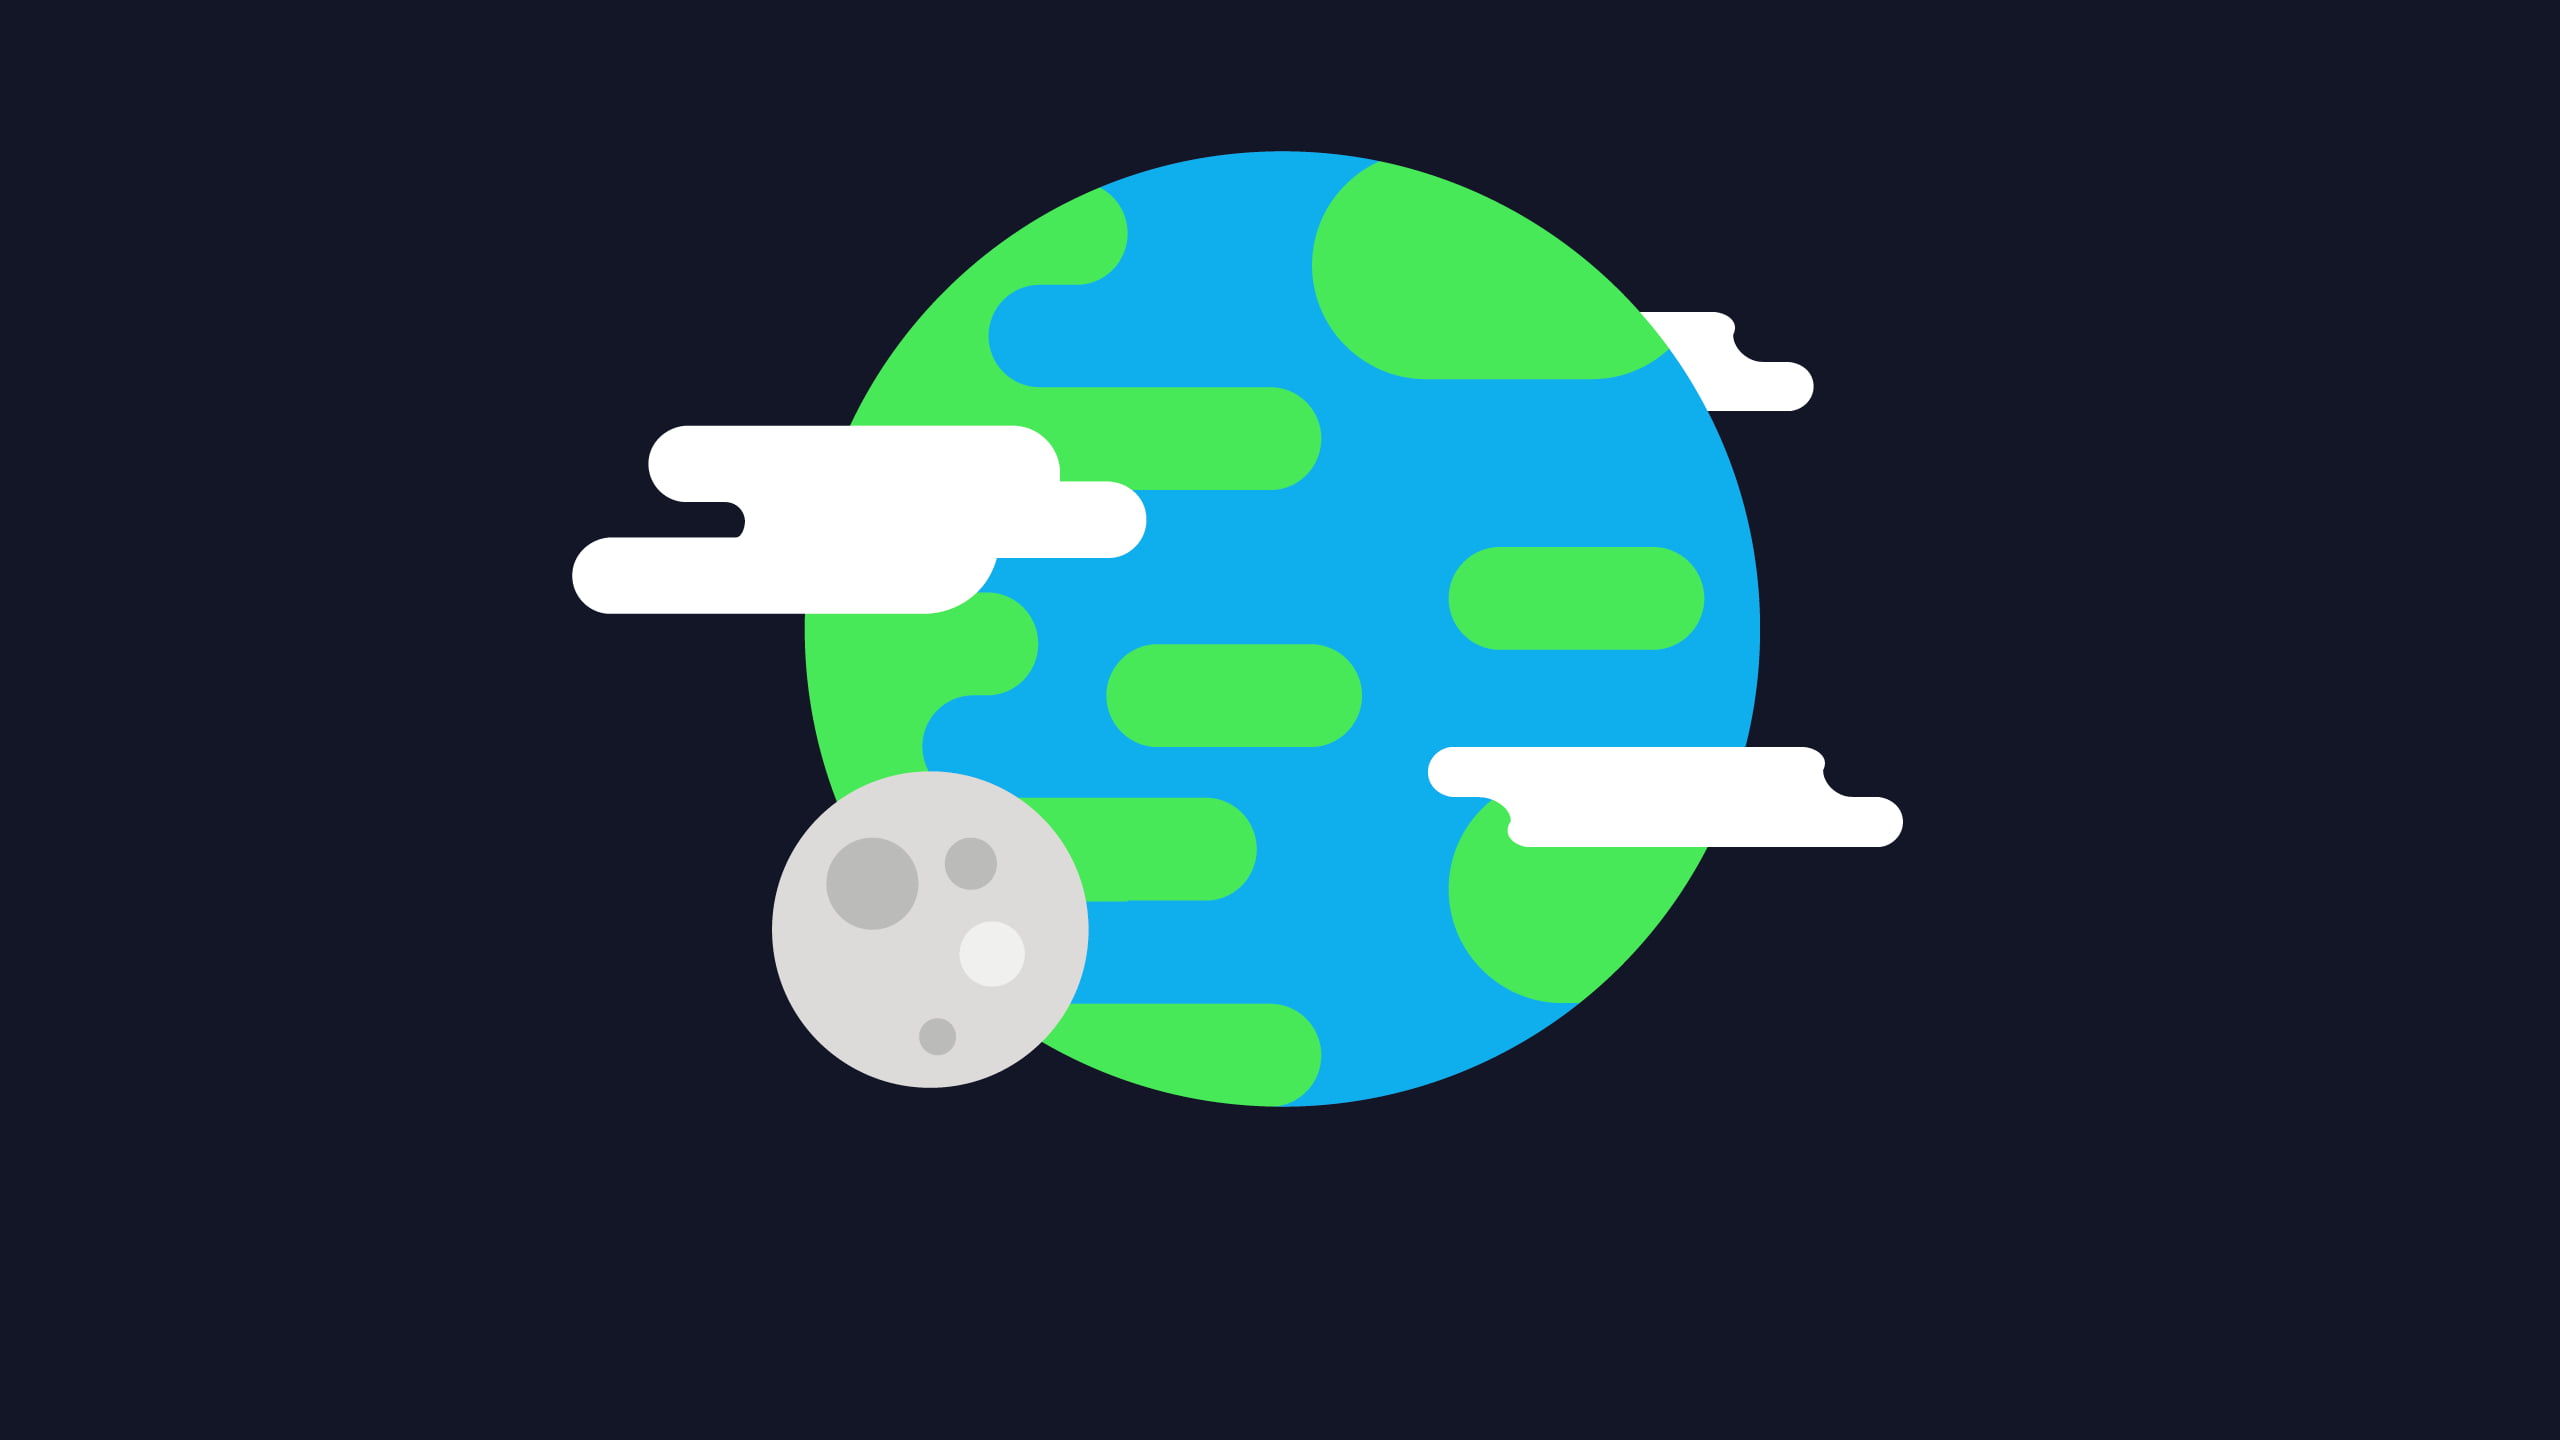 blue and green earth illustration, minimalism, Earth, space, Moon